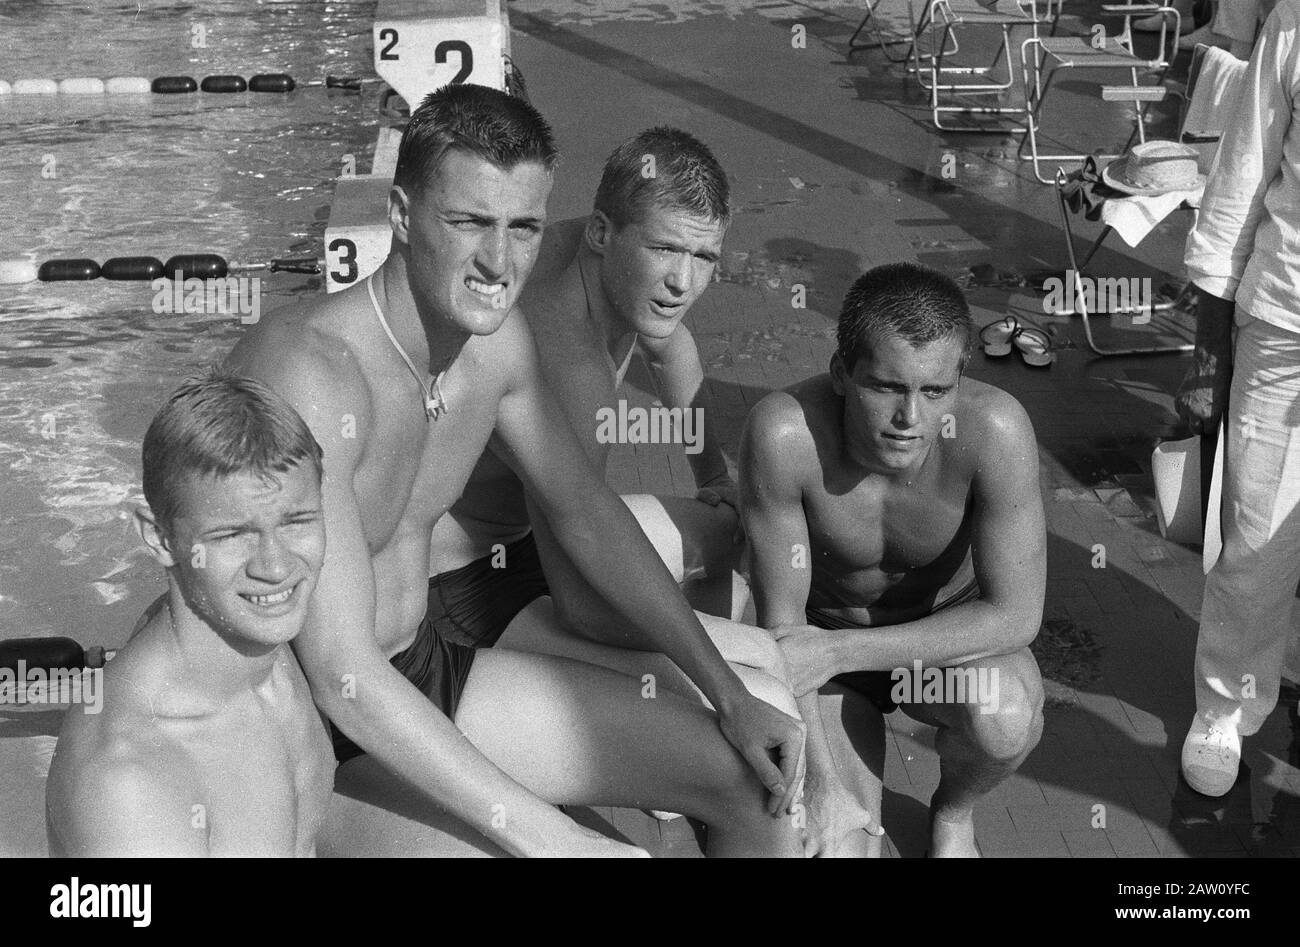 Olympic Games in Rome, US 4x100 meter medley relay team v.l.n.r. Bennett, Hait, Clark and Gillanders Annotation: Composition for the series. The American team that eventually won the gold medal was made. Hait, Larson, McKinney and Farrell) Date: August 28, 1960 Location: Rome Keywords: sports, swimming Person Name: Bennett, Bob Clark, Steve, Gillanders, Dave, Hait, Paul Institution Name: Olympics Stock Photo